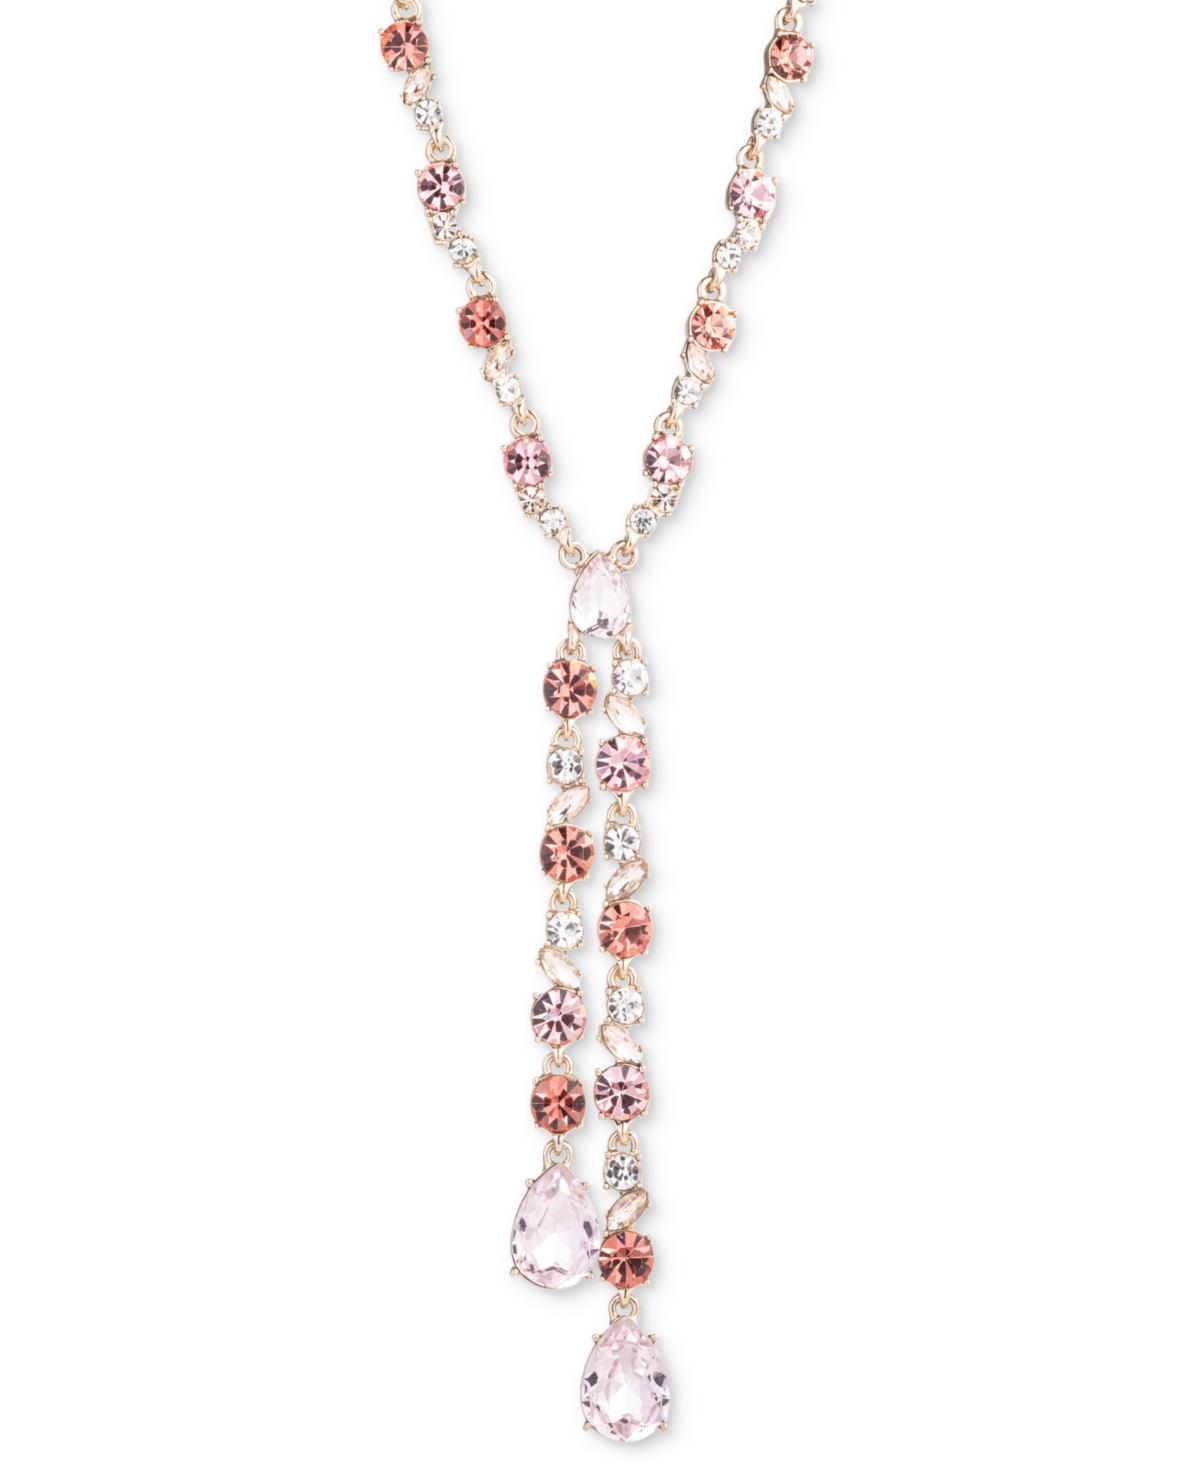 Givenchy Gold-tone Rose Crystal Lariat Necklace, 20" + 3" Extender In White